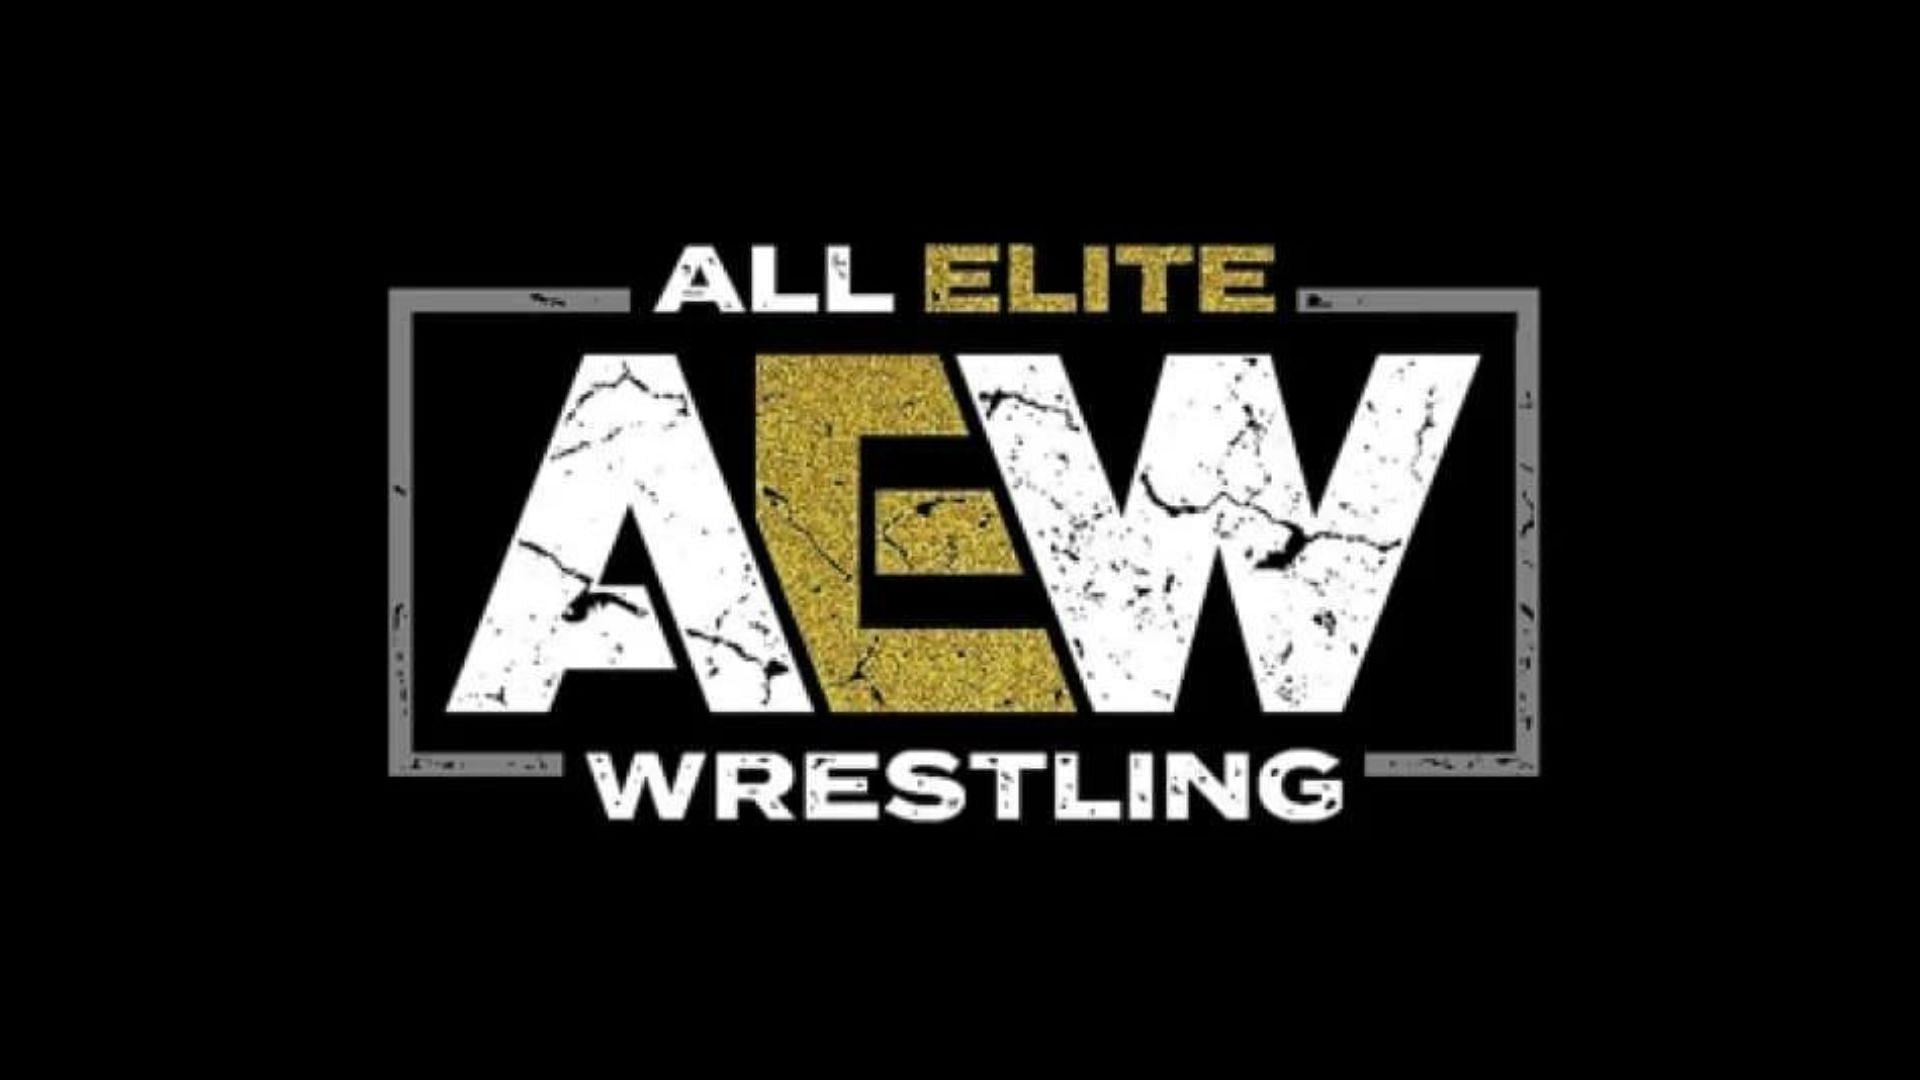 Find out which AEW star is being talked about?